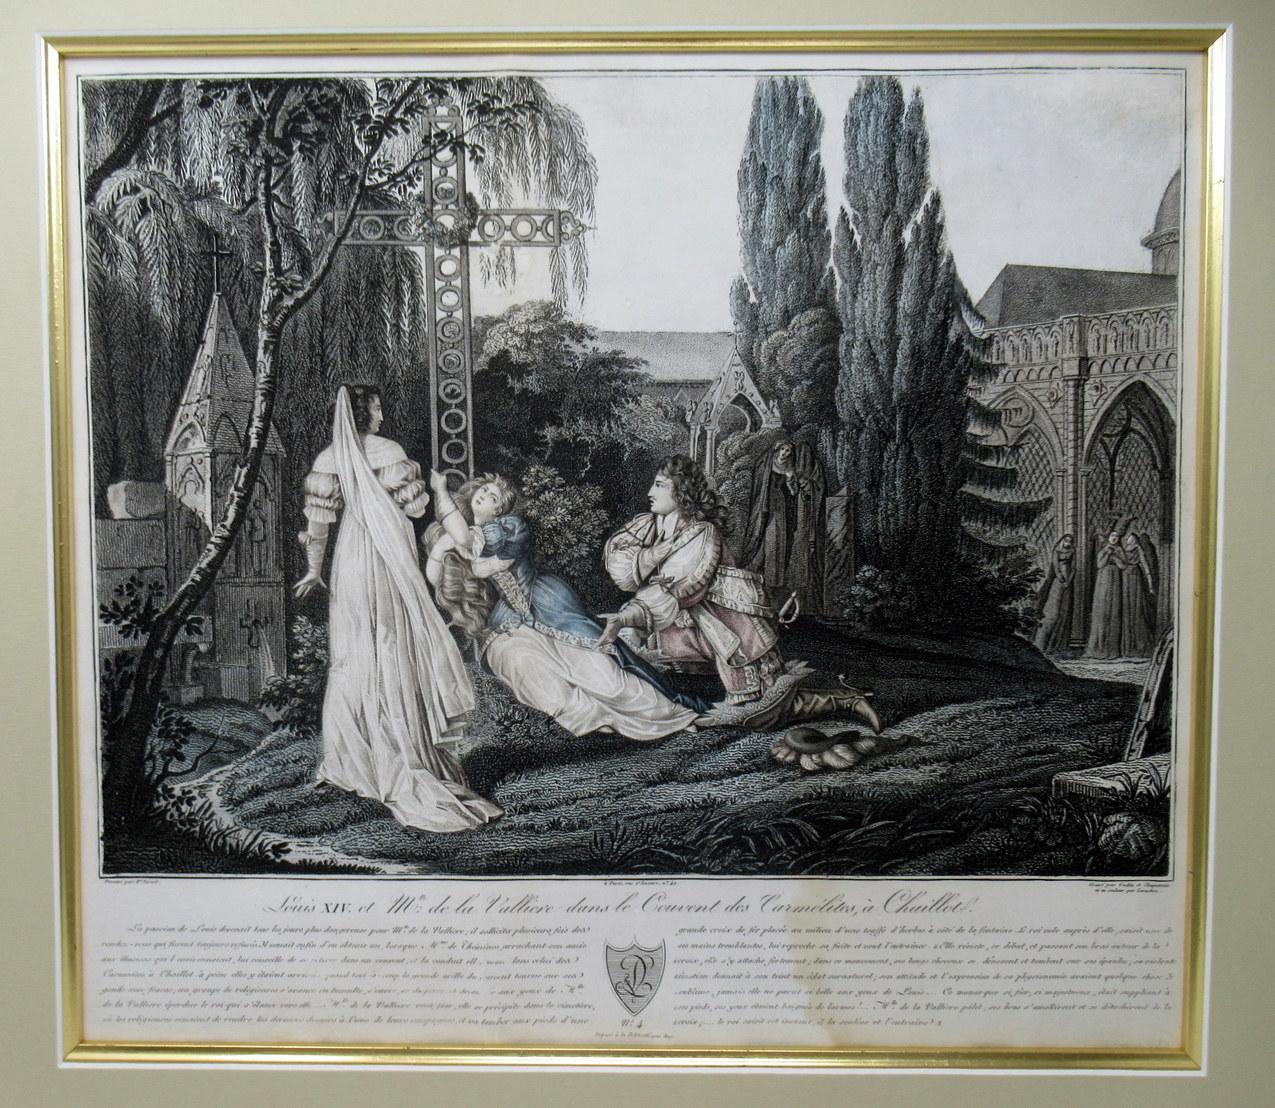 French hand colored engraving on paper, mid-19th century, possibly earlier titled

“Louis XIV et Madame de la Valliere dans le Couvent des Carmelites, a Chaillot” 

“Louis XIV and Madame de la Valliere in the Convent of the Carmelites, in